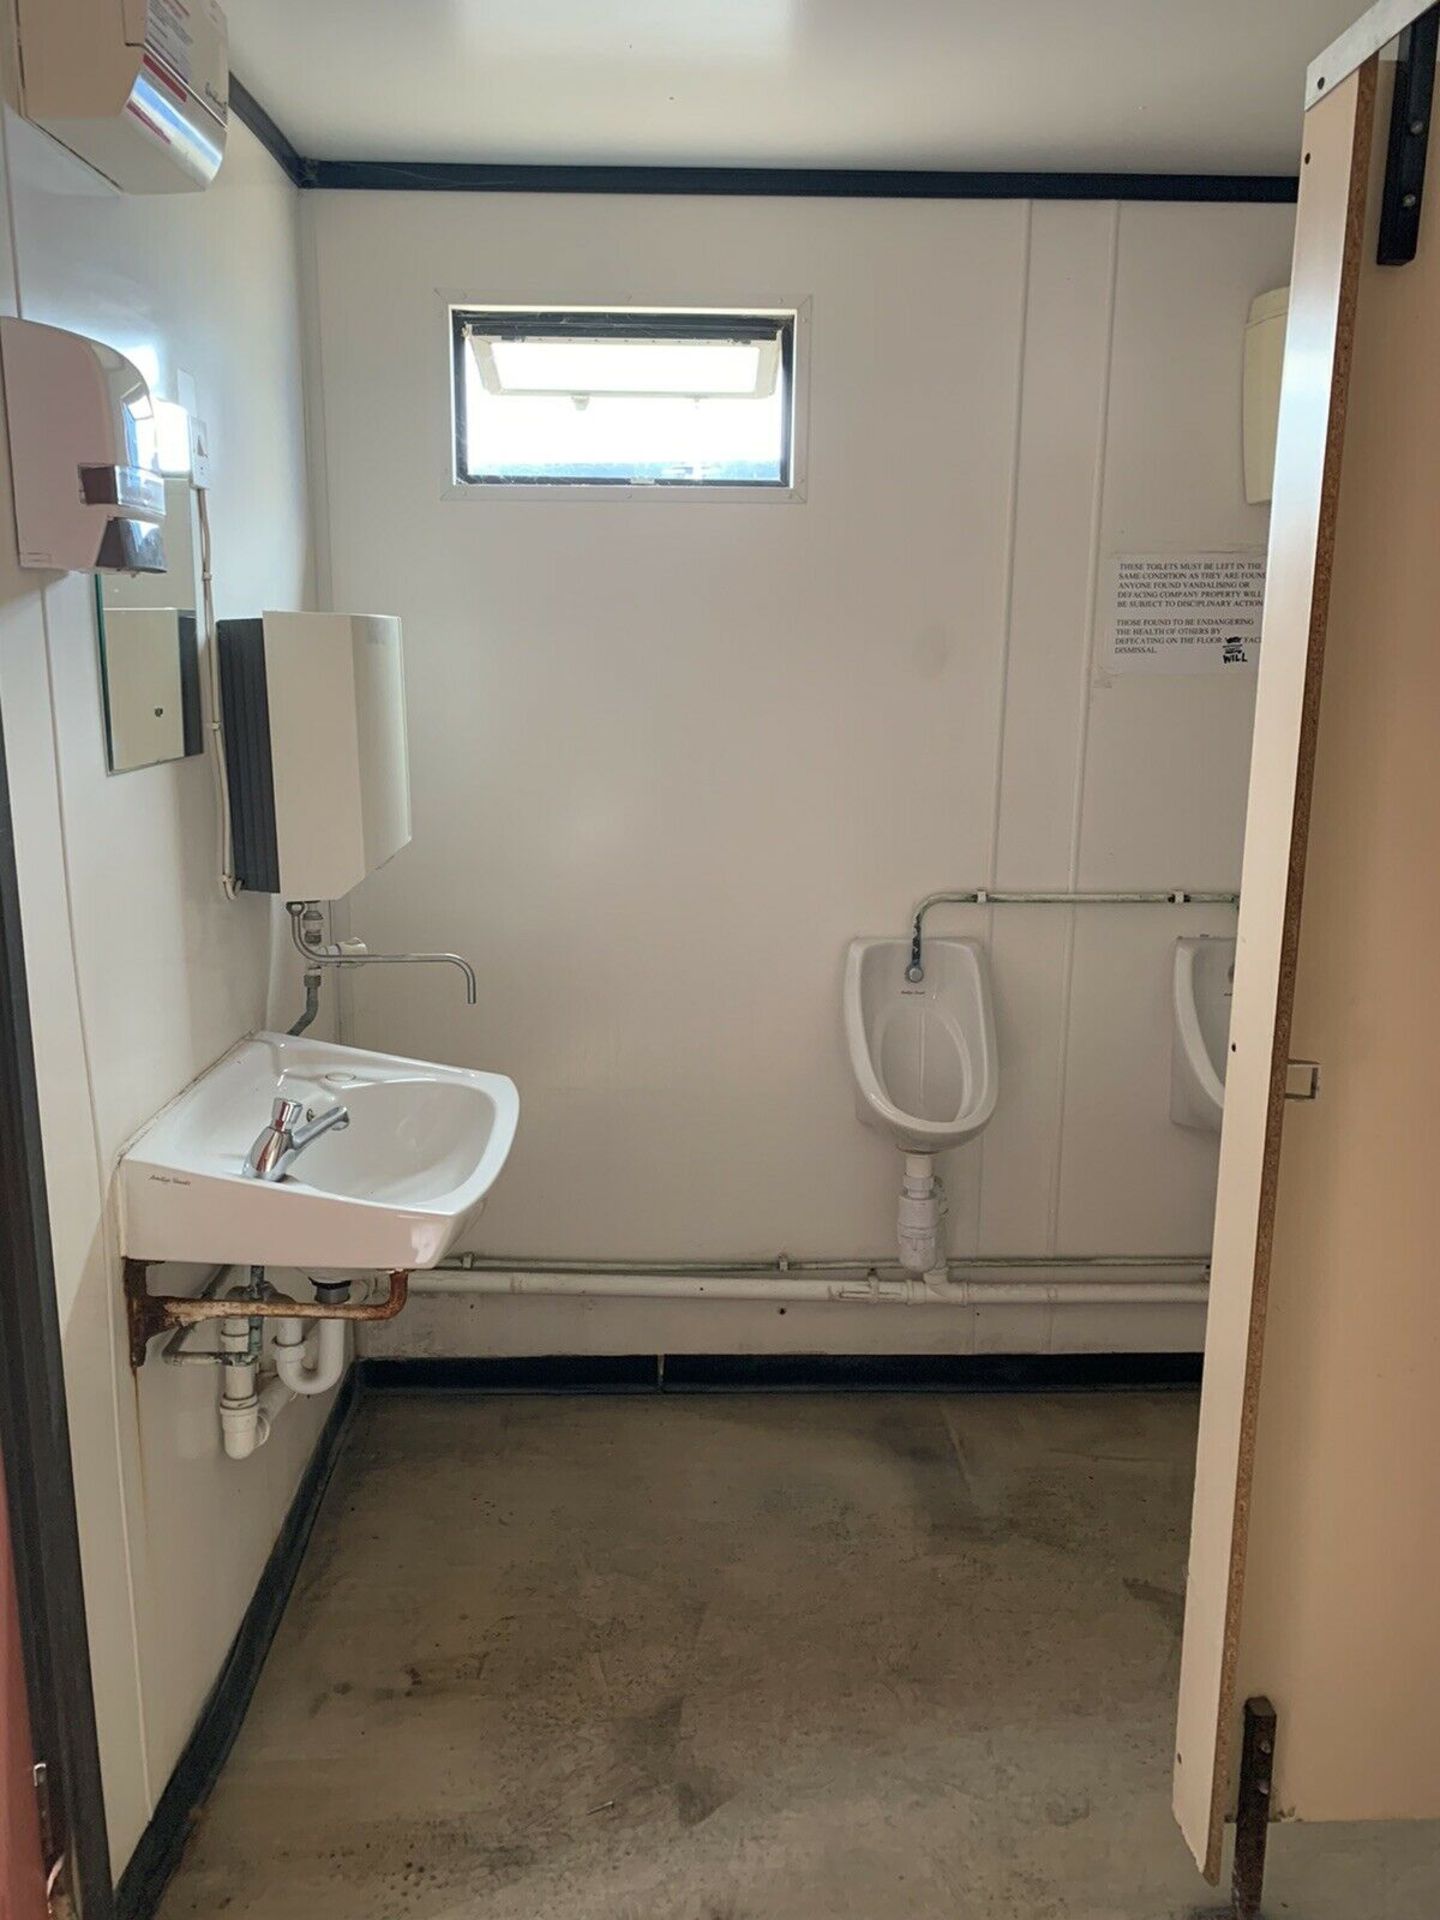 Portable Toilet Block 12ft x 8ft - Image 9 of 11